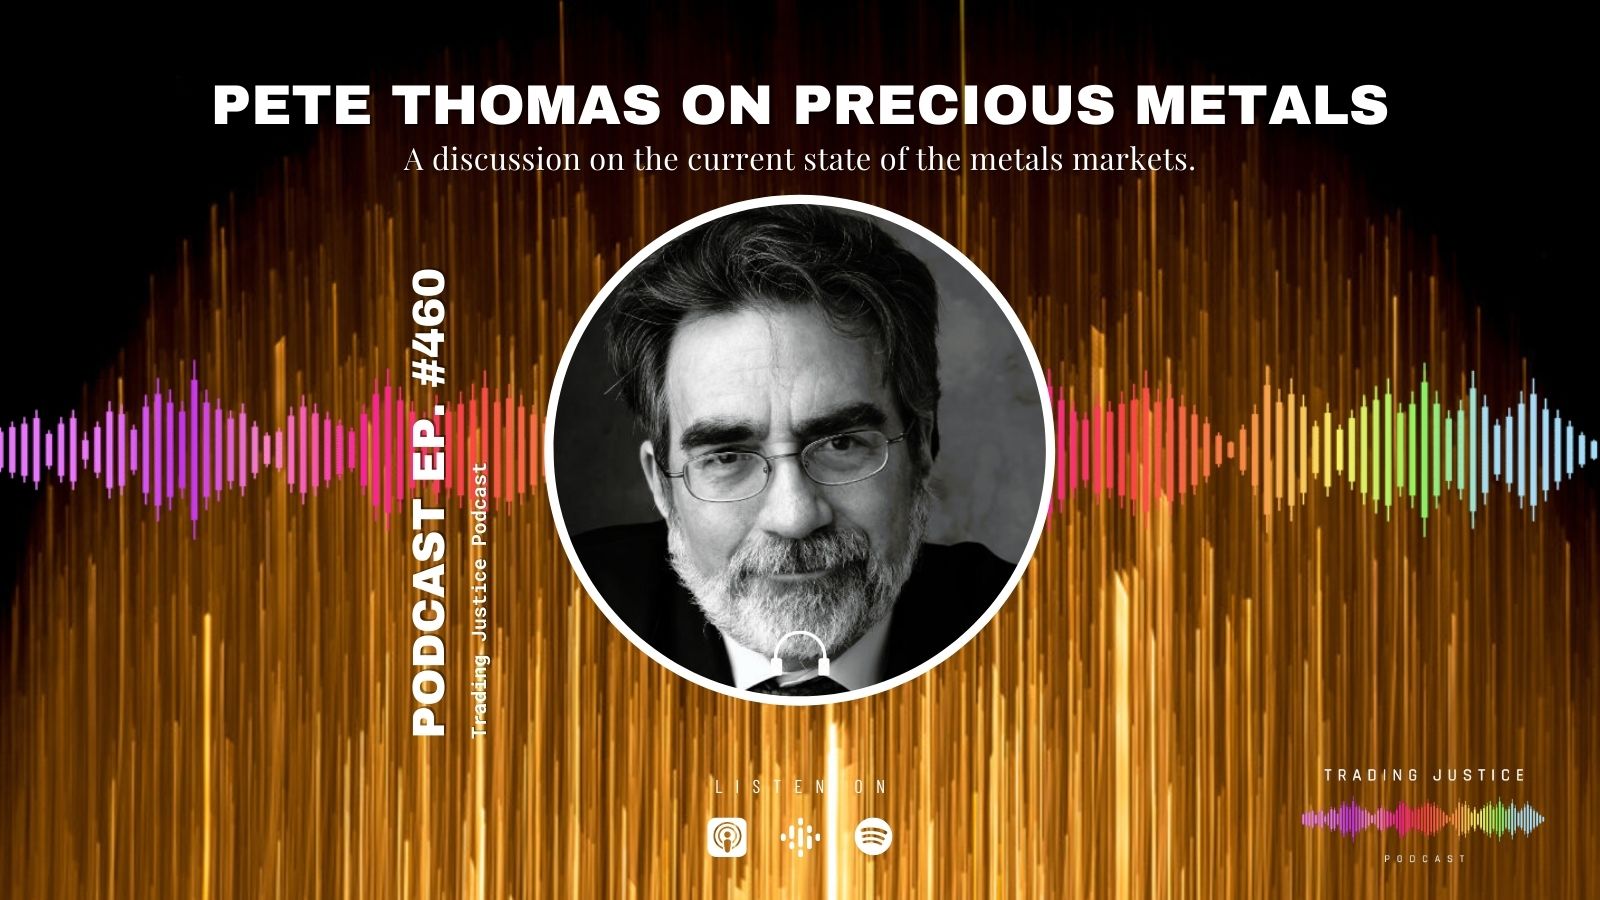 Trading Justice 460: Pete Thomas on the current Precious Metals market